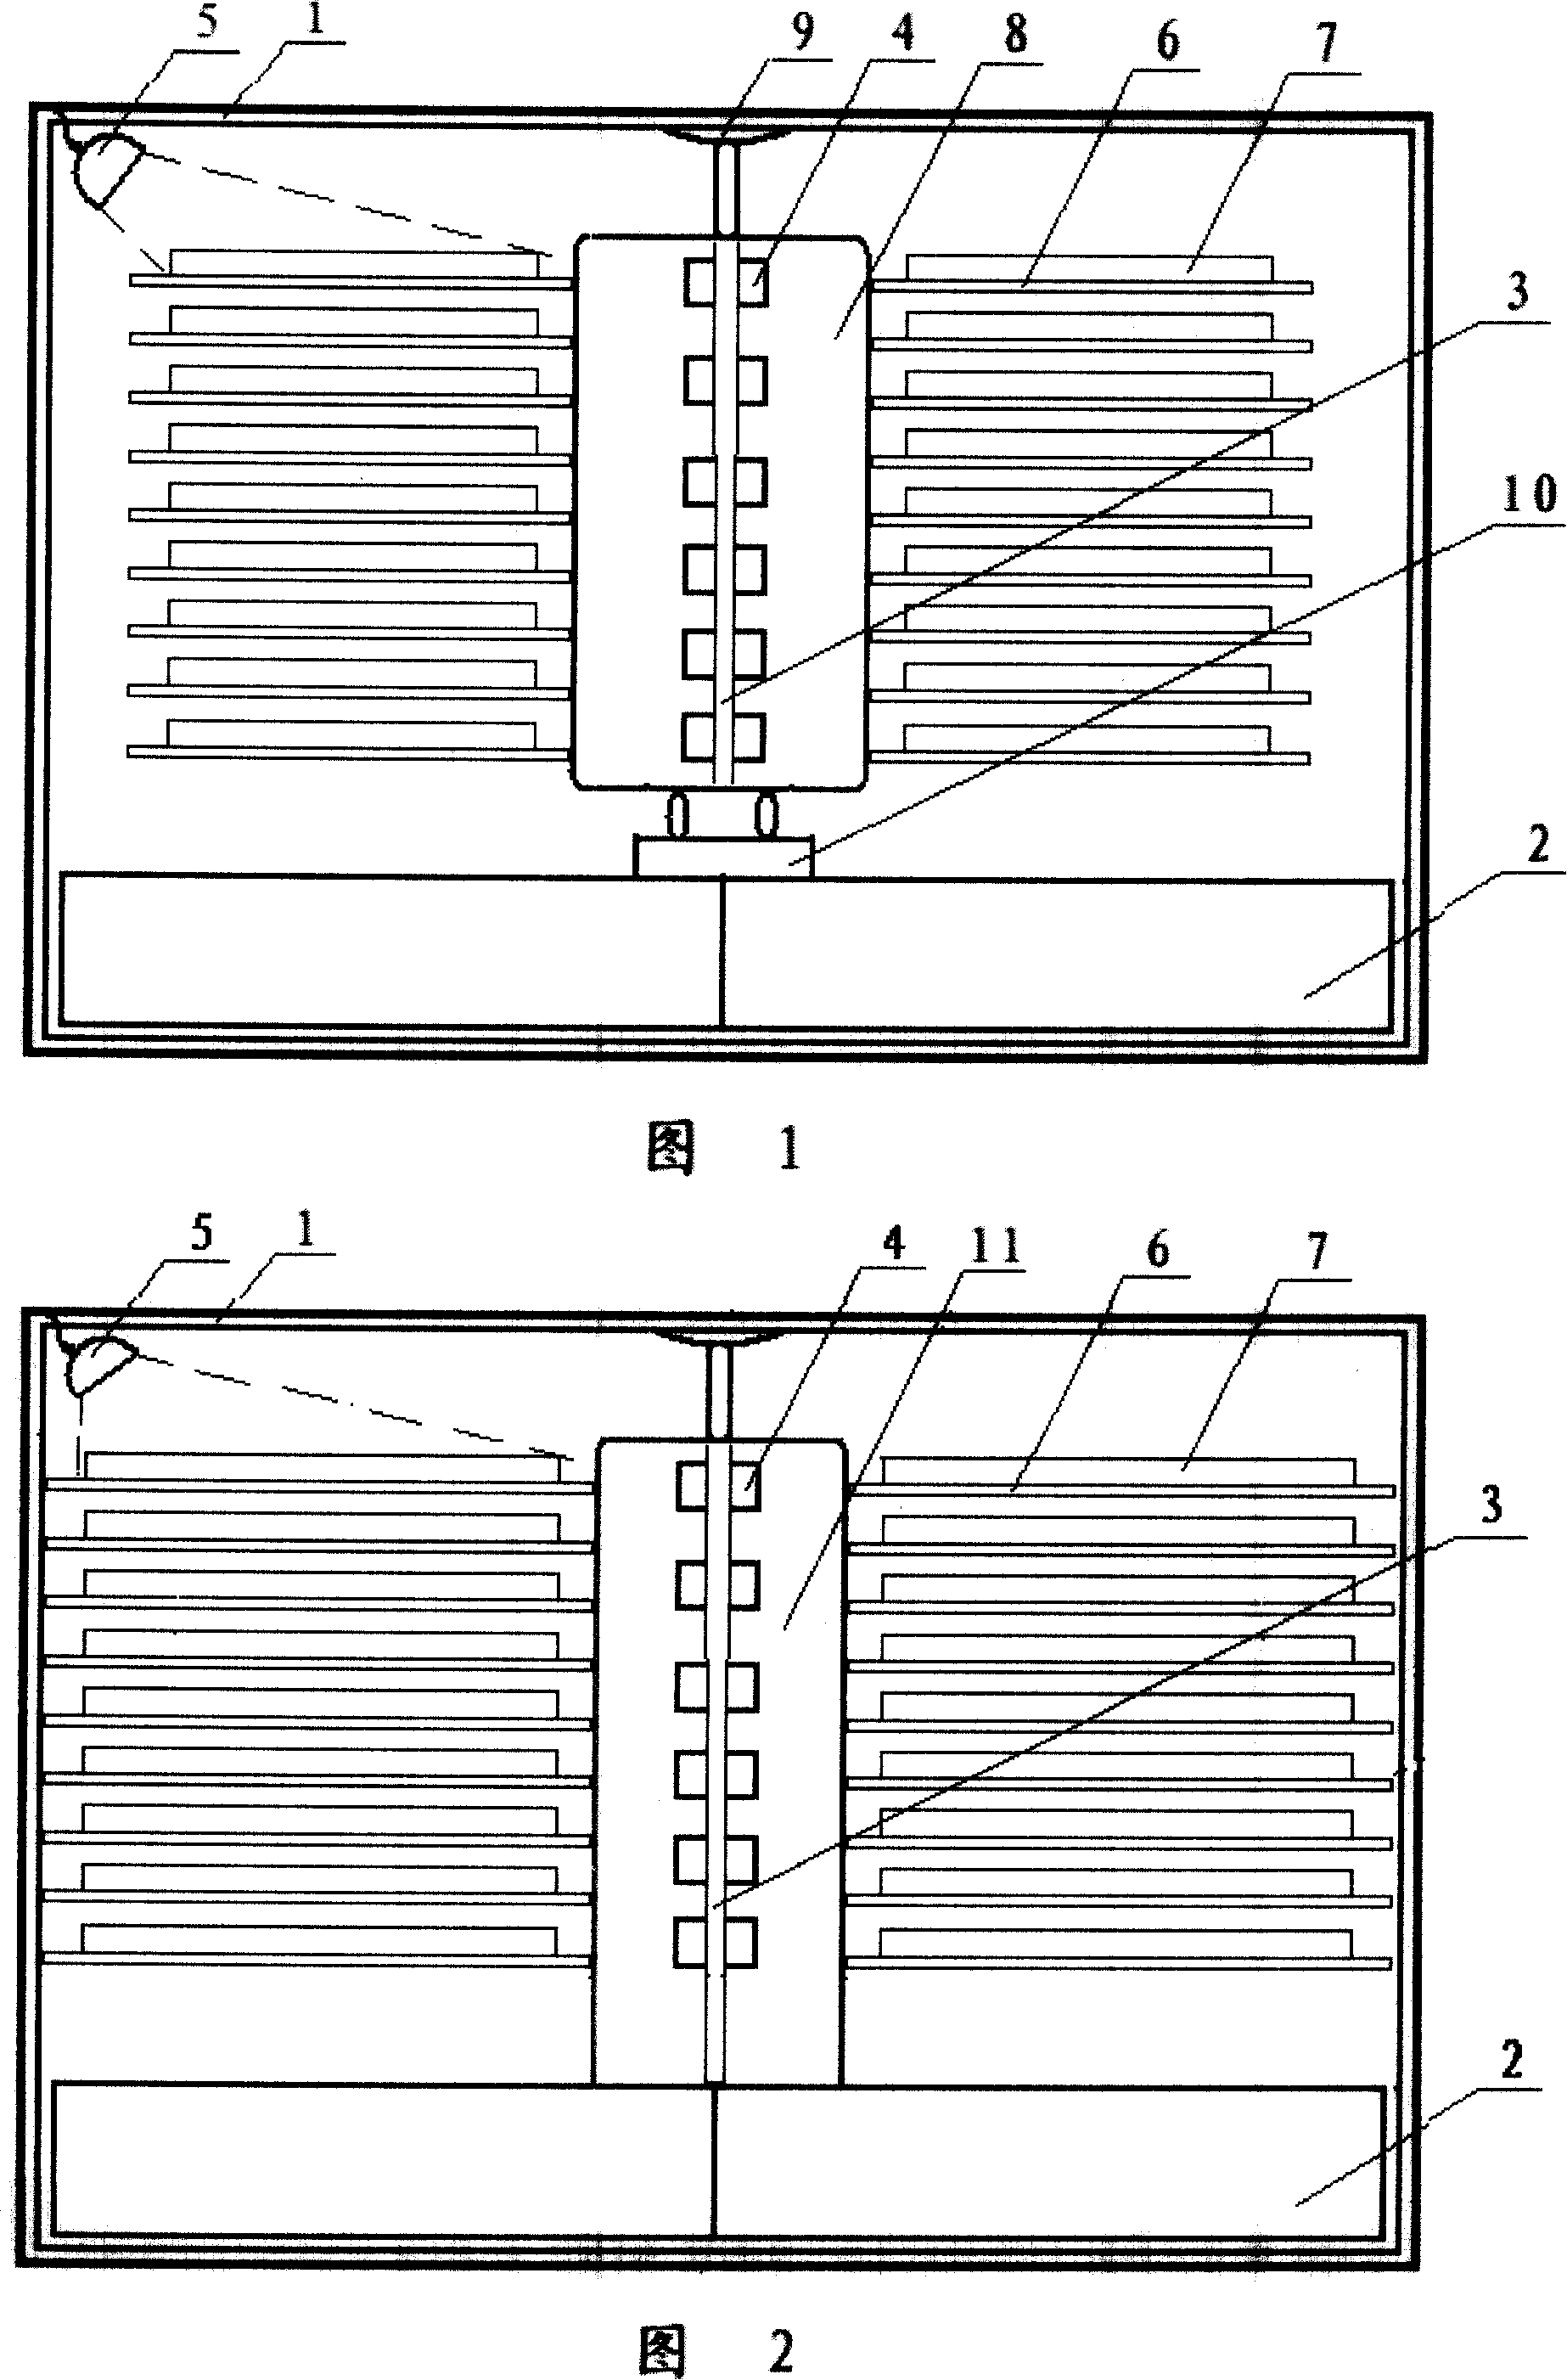 Microwave vacuum freeze-drying apparatus for food and drug production